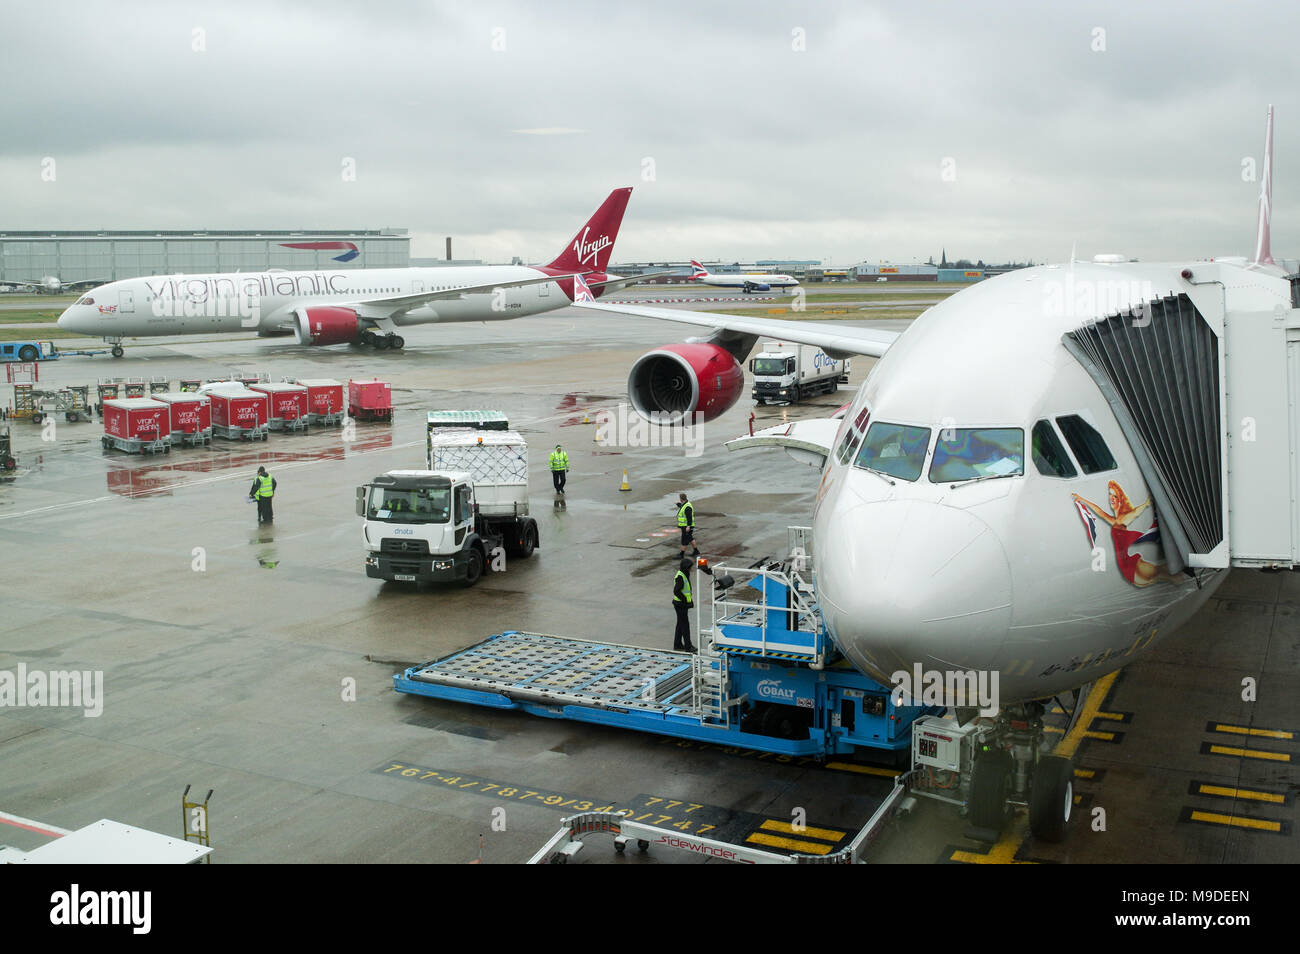 Virgin Atlantic Airbus A340 aircraft preparing for departure while a Virgin Boeing 787 passes in the background  at London Heathrow Airport Stock Photo